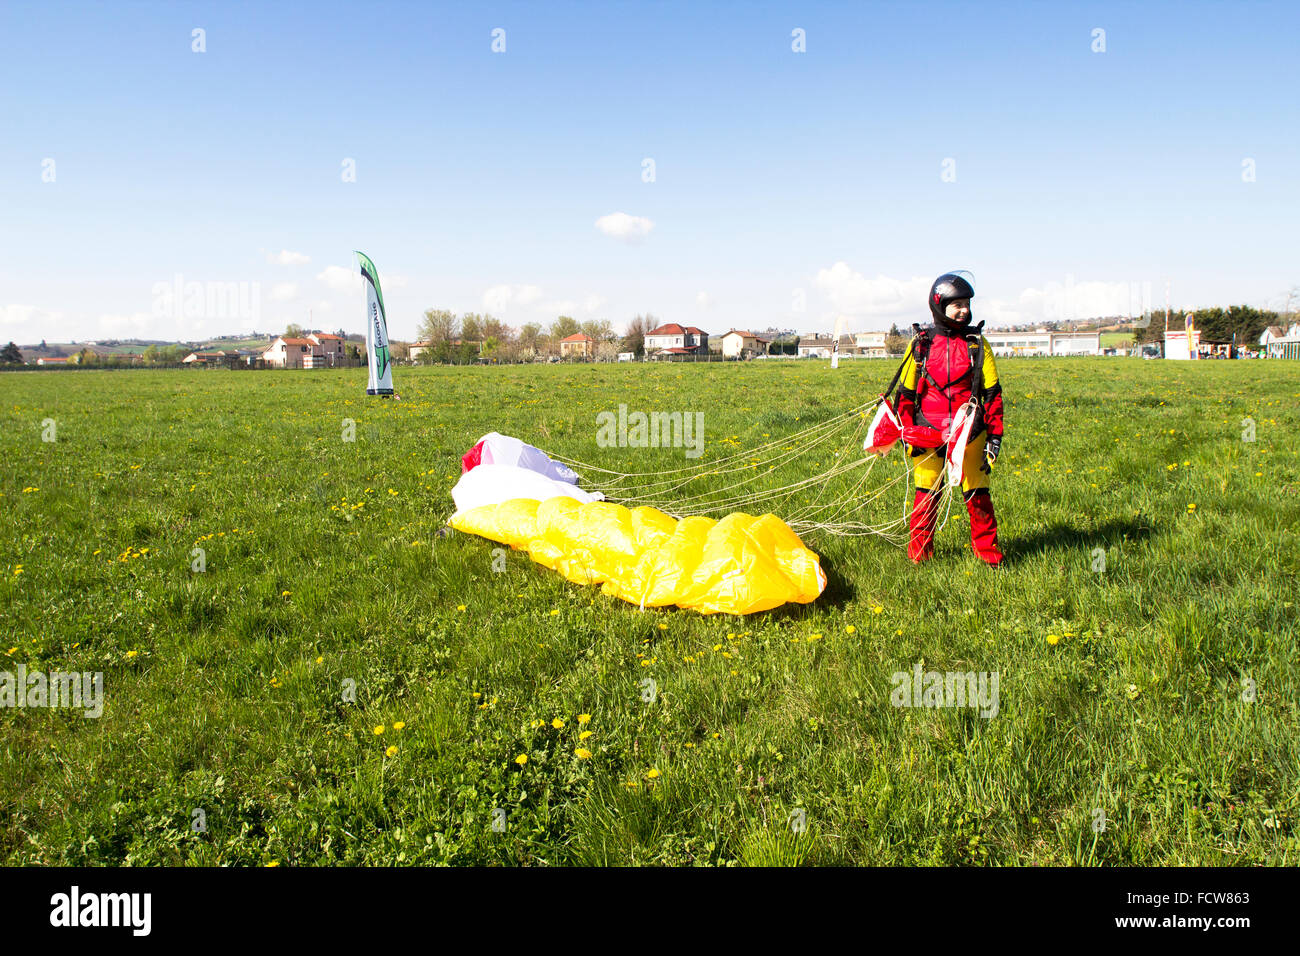 This skydiver girl landed on her feet in the dedicated grass area. She can't believe it, that she did this jump and is save now! Stock Photo